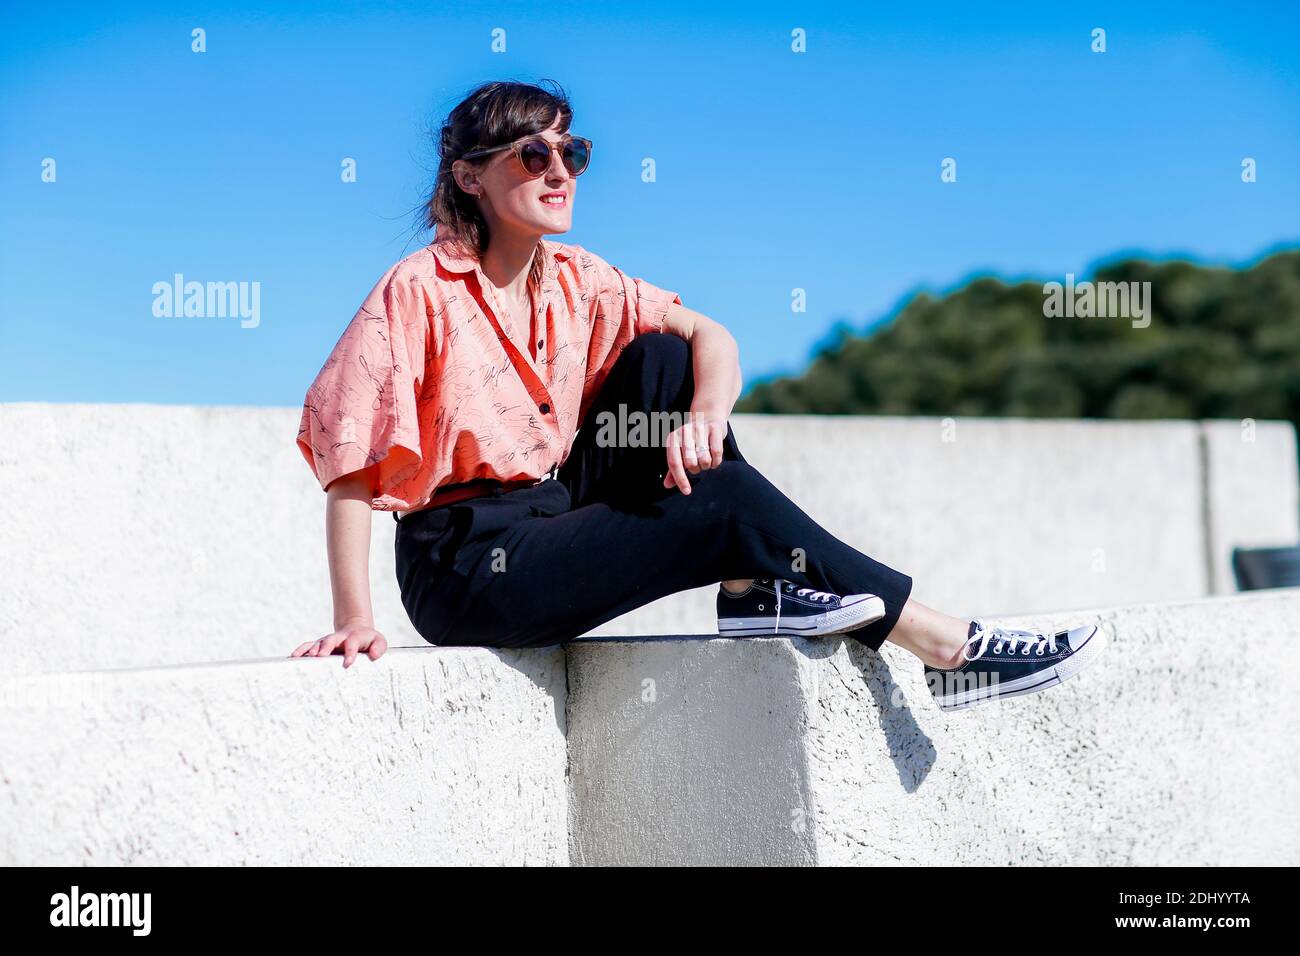 Street style, singer Juliette Armanet at 31st International festival of Fashion and Photography (31e Festival International de Mode et de Photographie de Hyeres) held at Villa Noailles, in Hyeres, France, on April 23rd, 2016. Photo by Marie-Paola Bertrand-Hillion/ABACAPRESS.COM Stock Photo